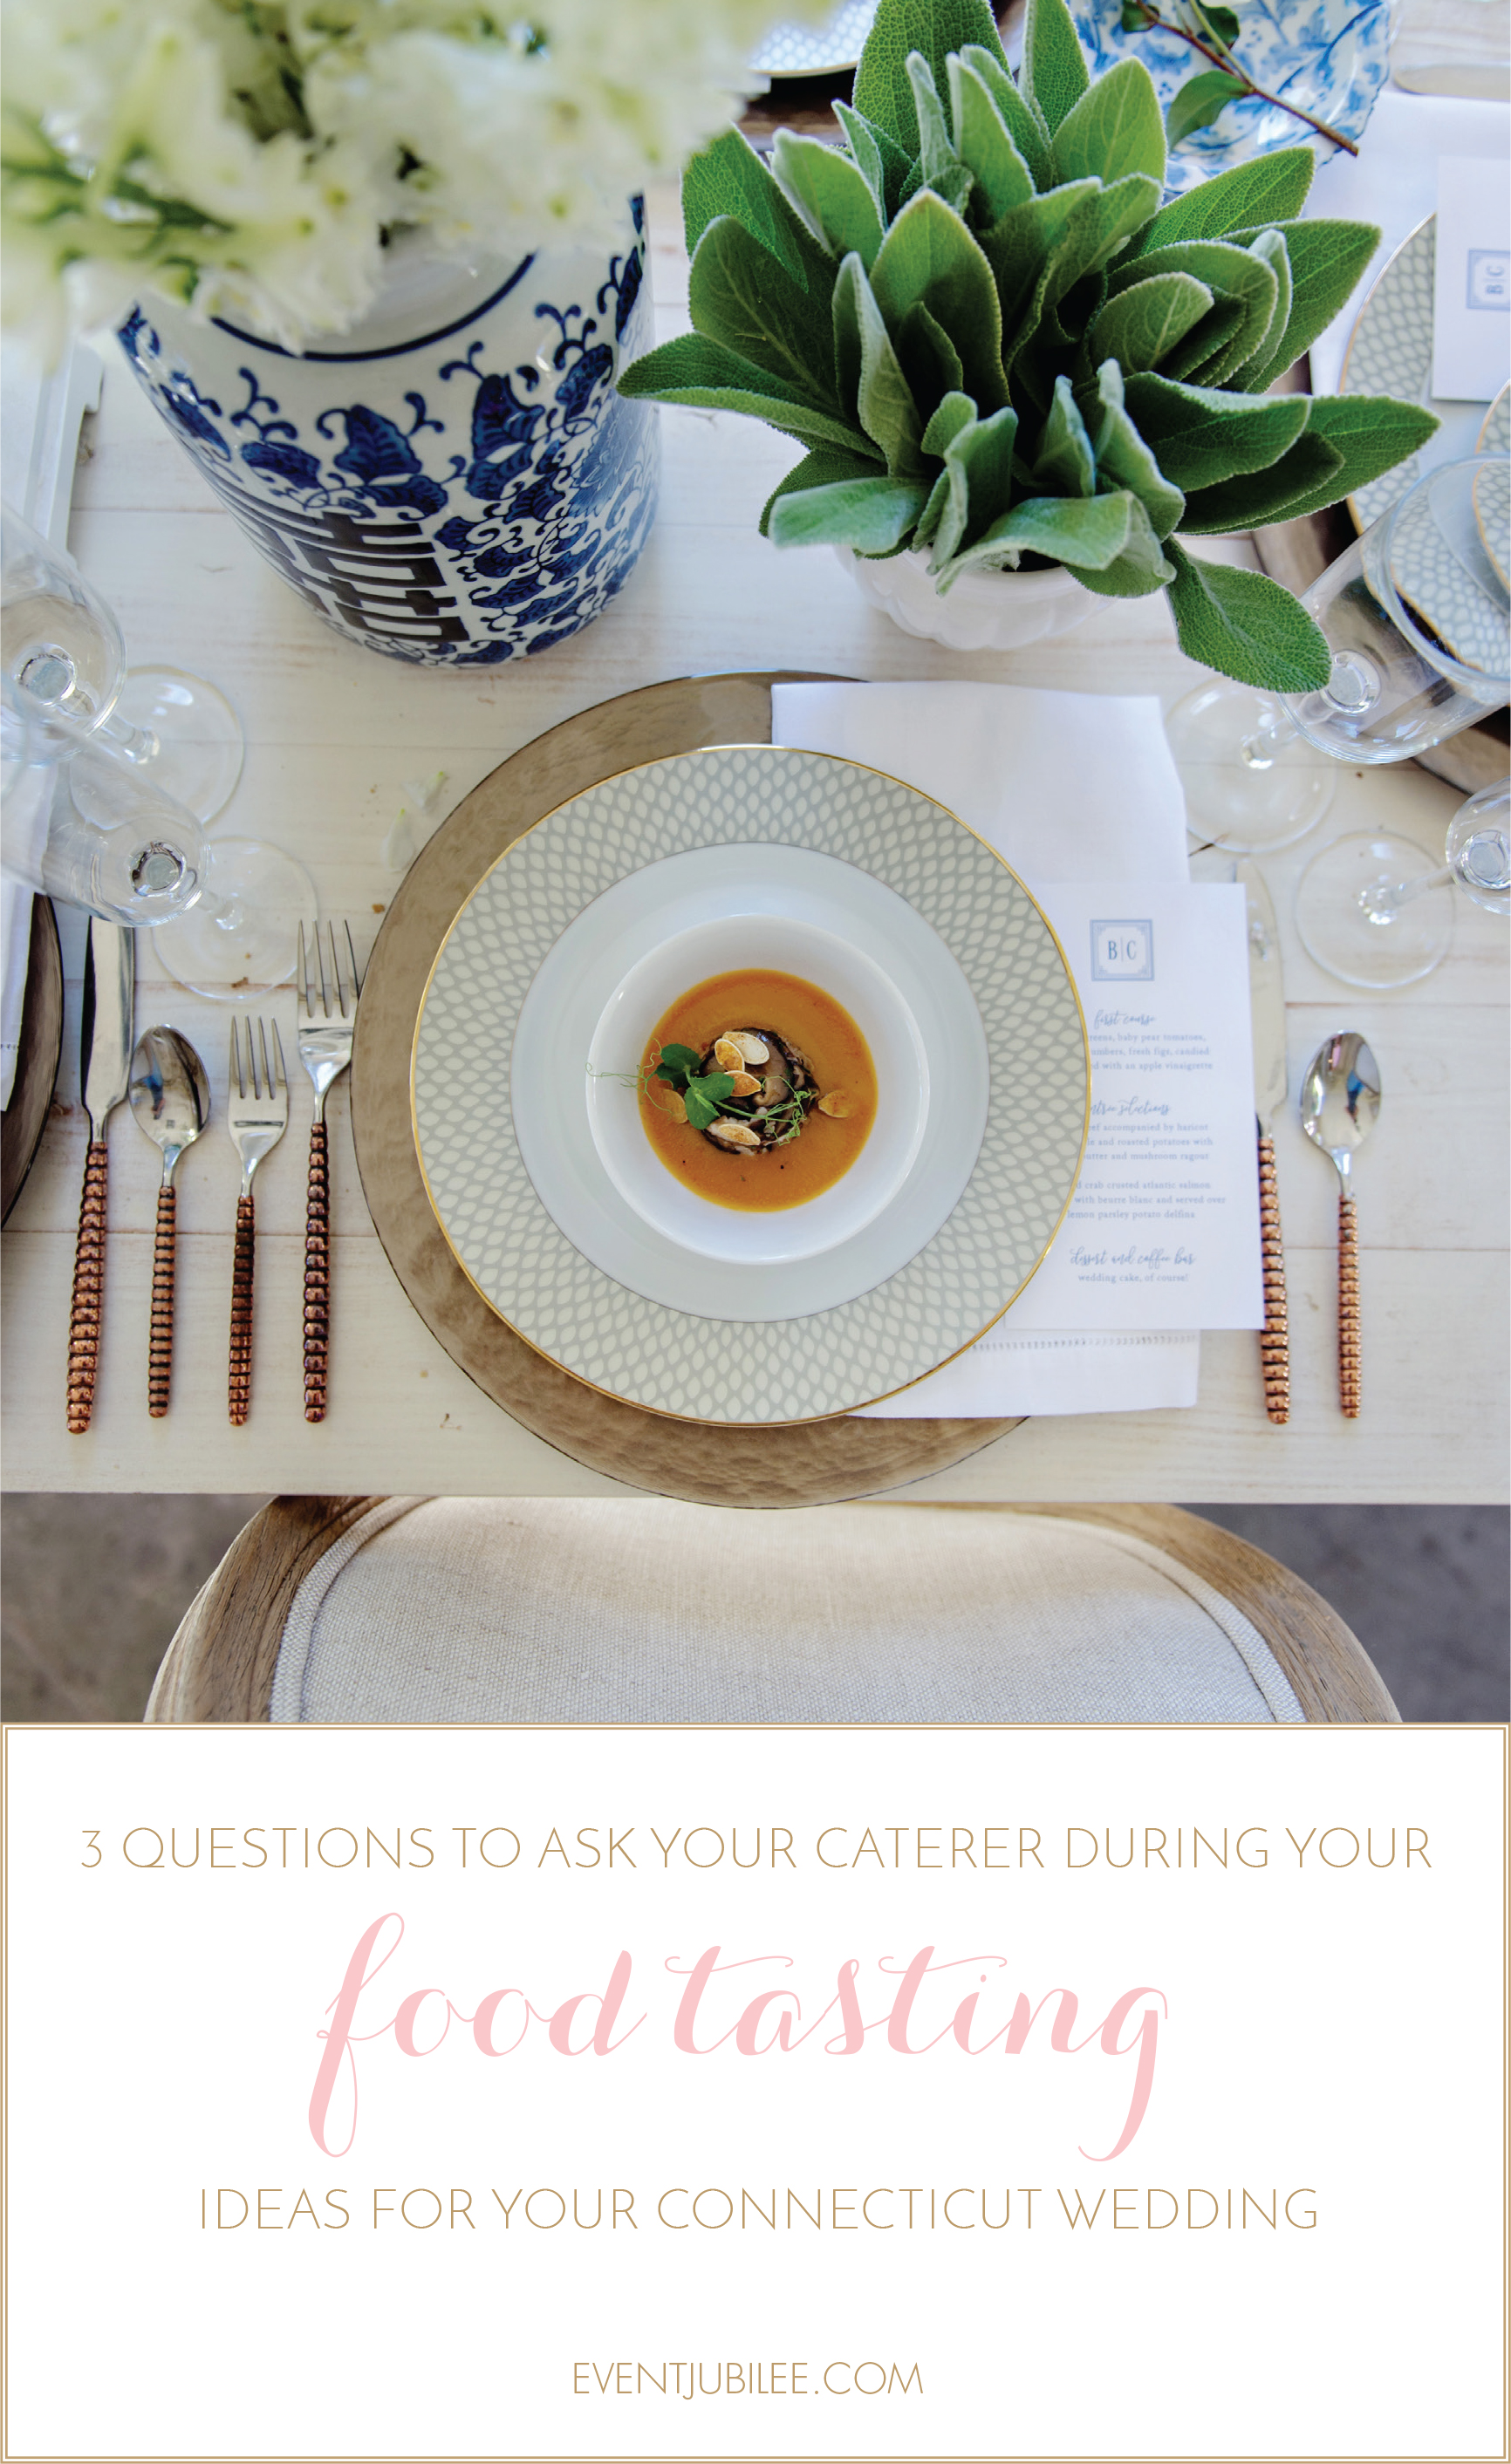 3 Questions to Ask Your Caterer During your Food Tasting